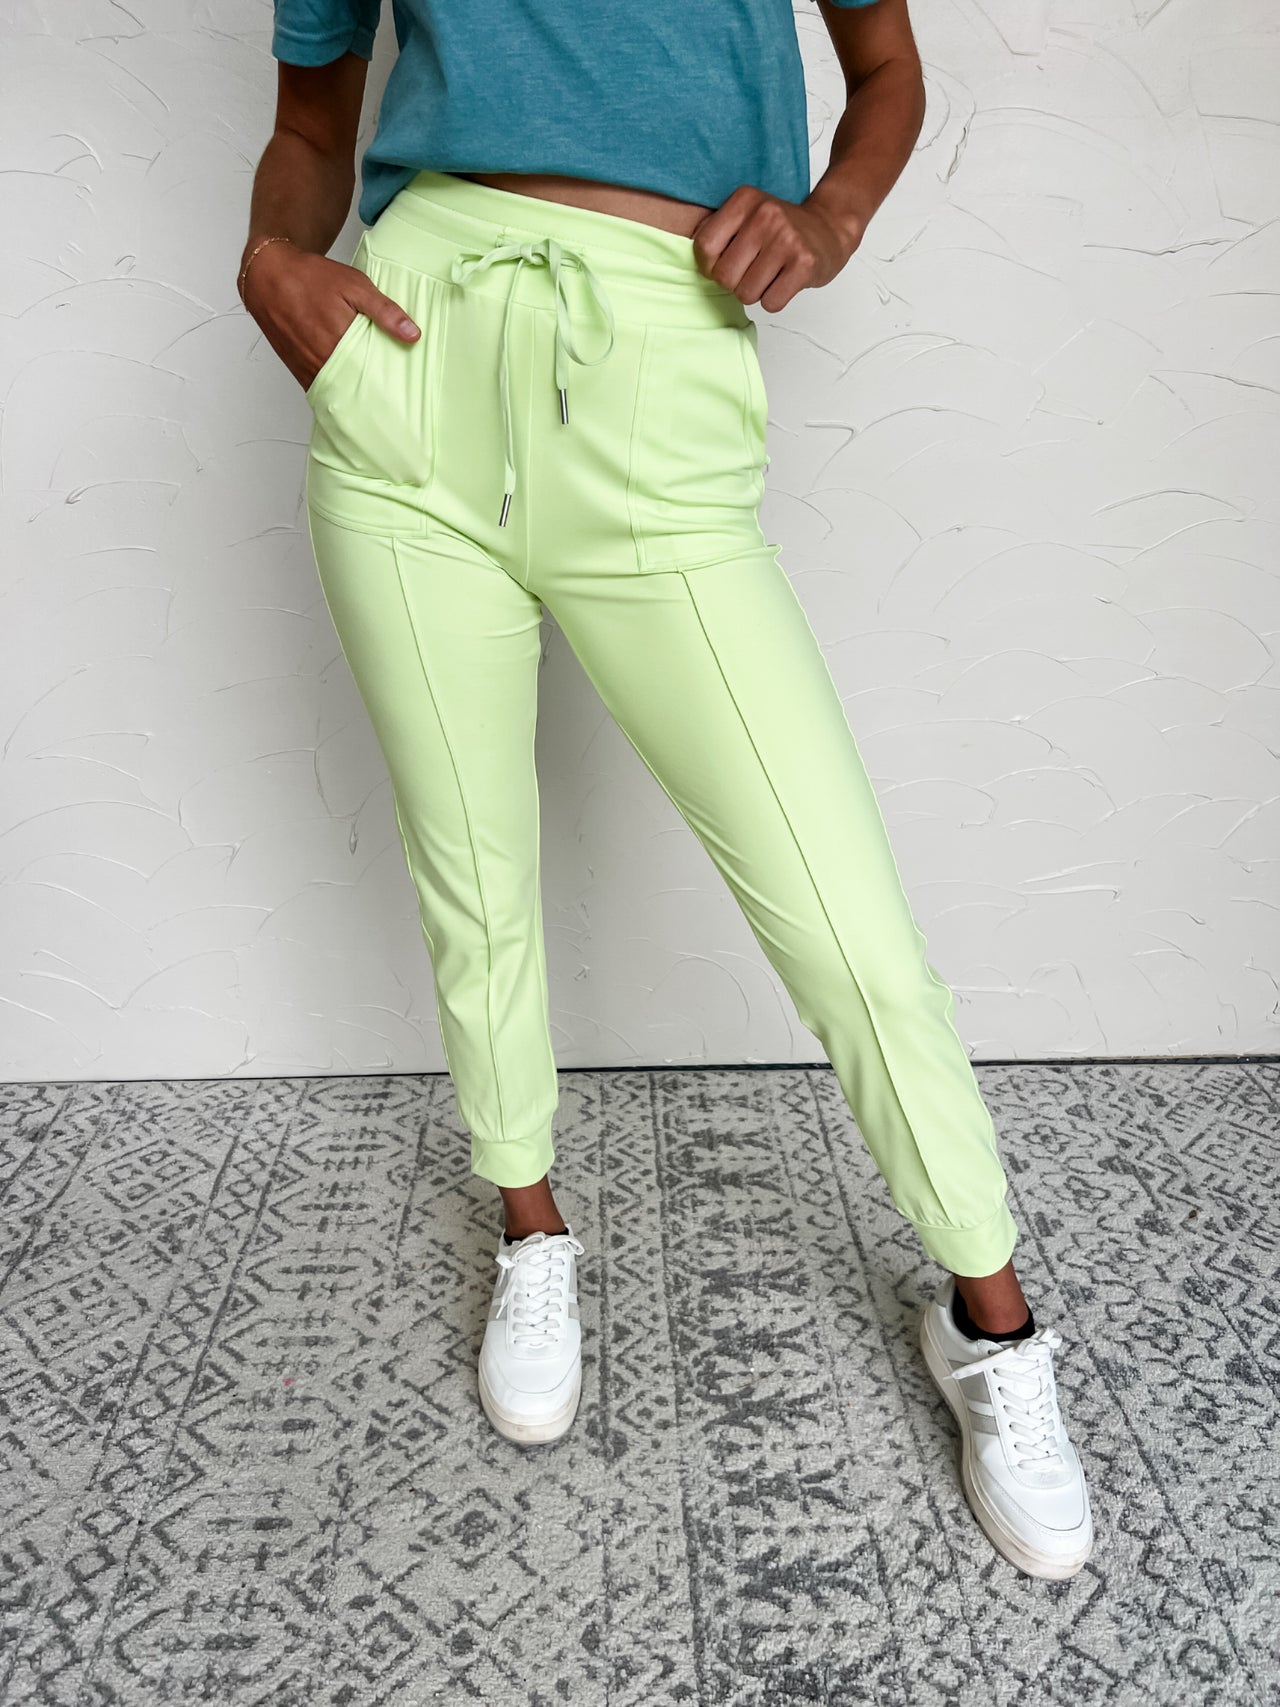 Runaway Girl Butter Soft Joggers- Lime